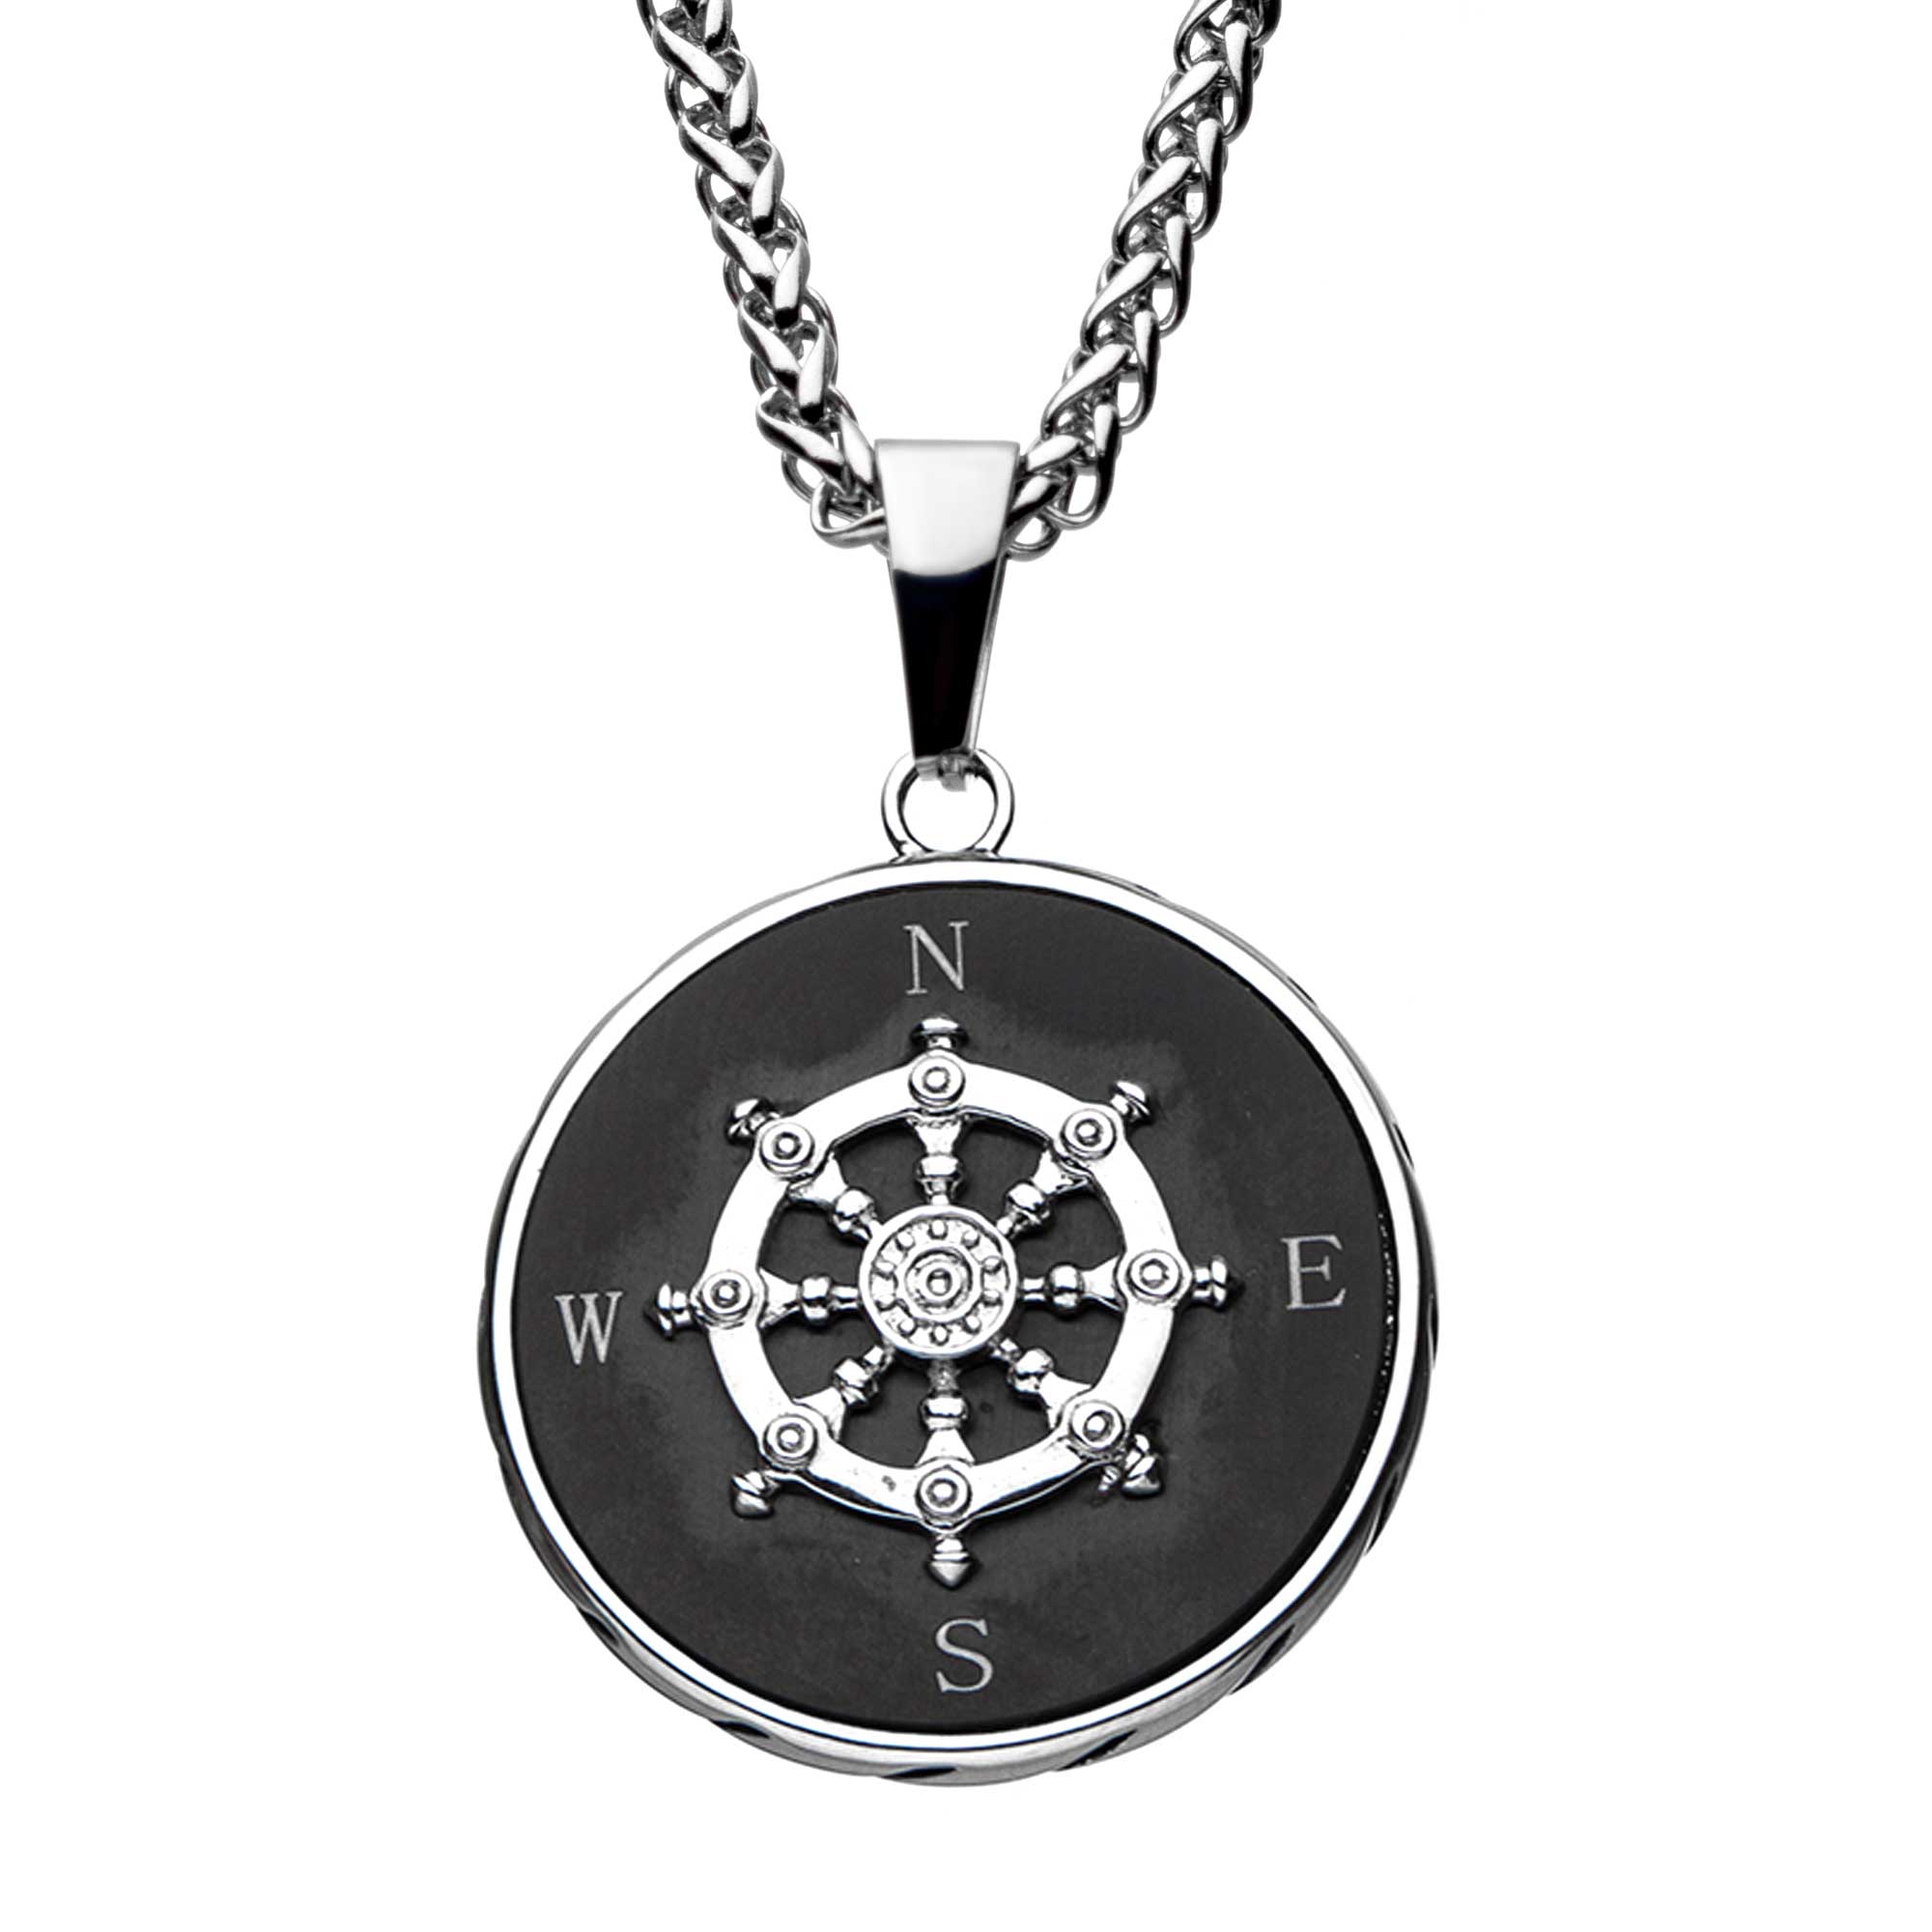 Stainless Steel Black Plated Ship's Wheel Compass Pendant with Chain Morin Jewelers Southbridge, MA